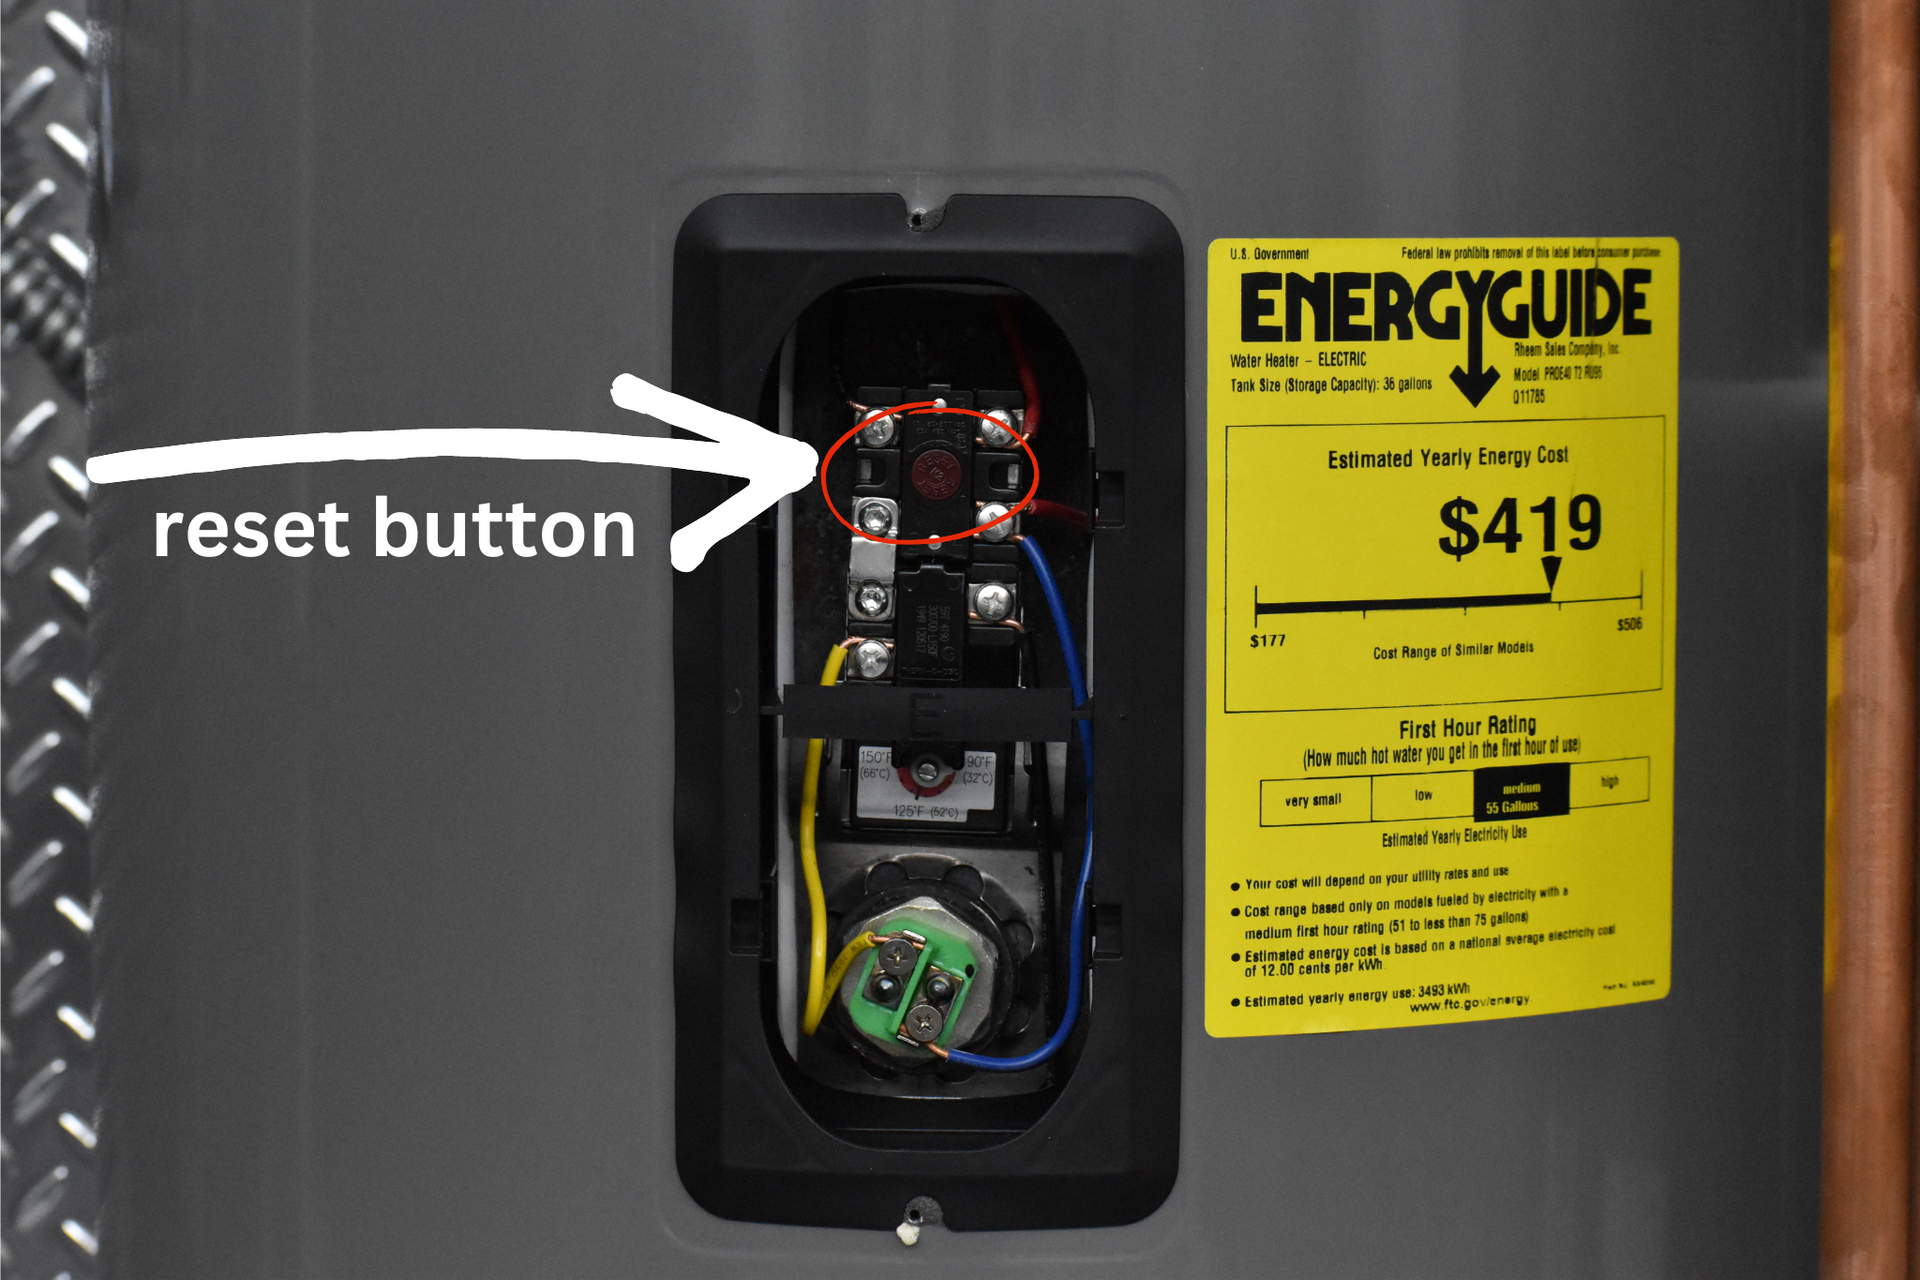 reset button in electric water heater control panel